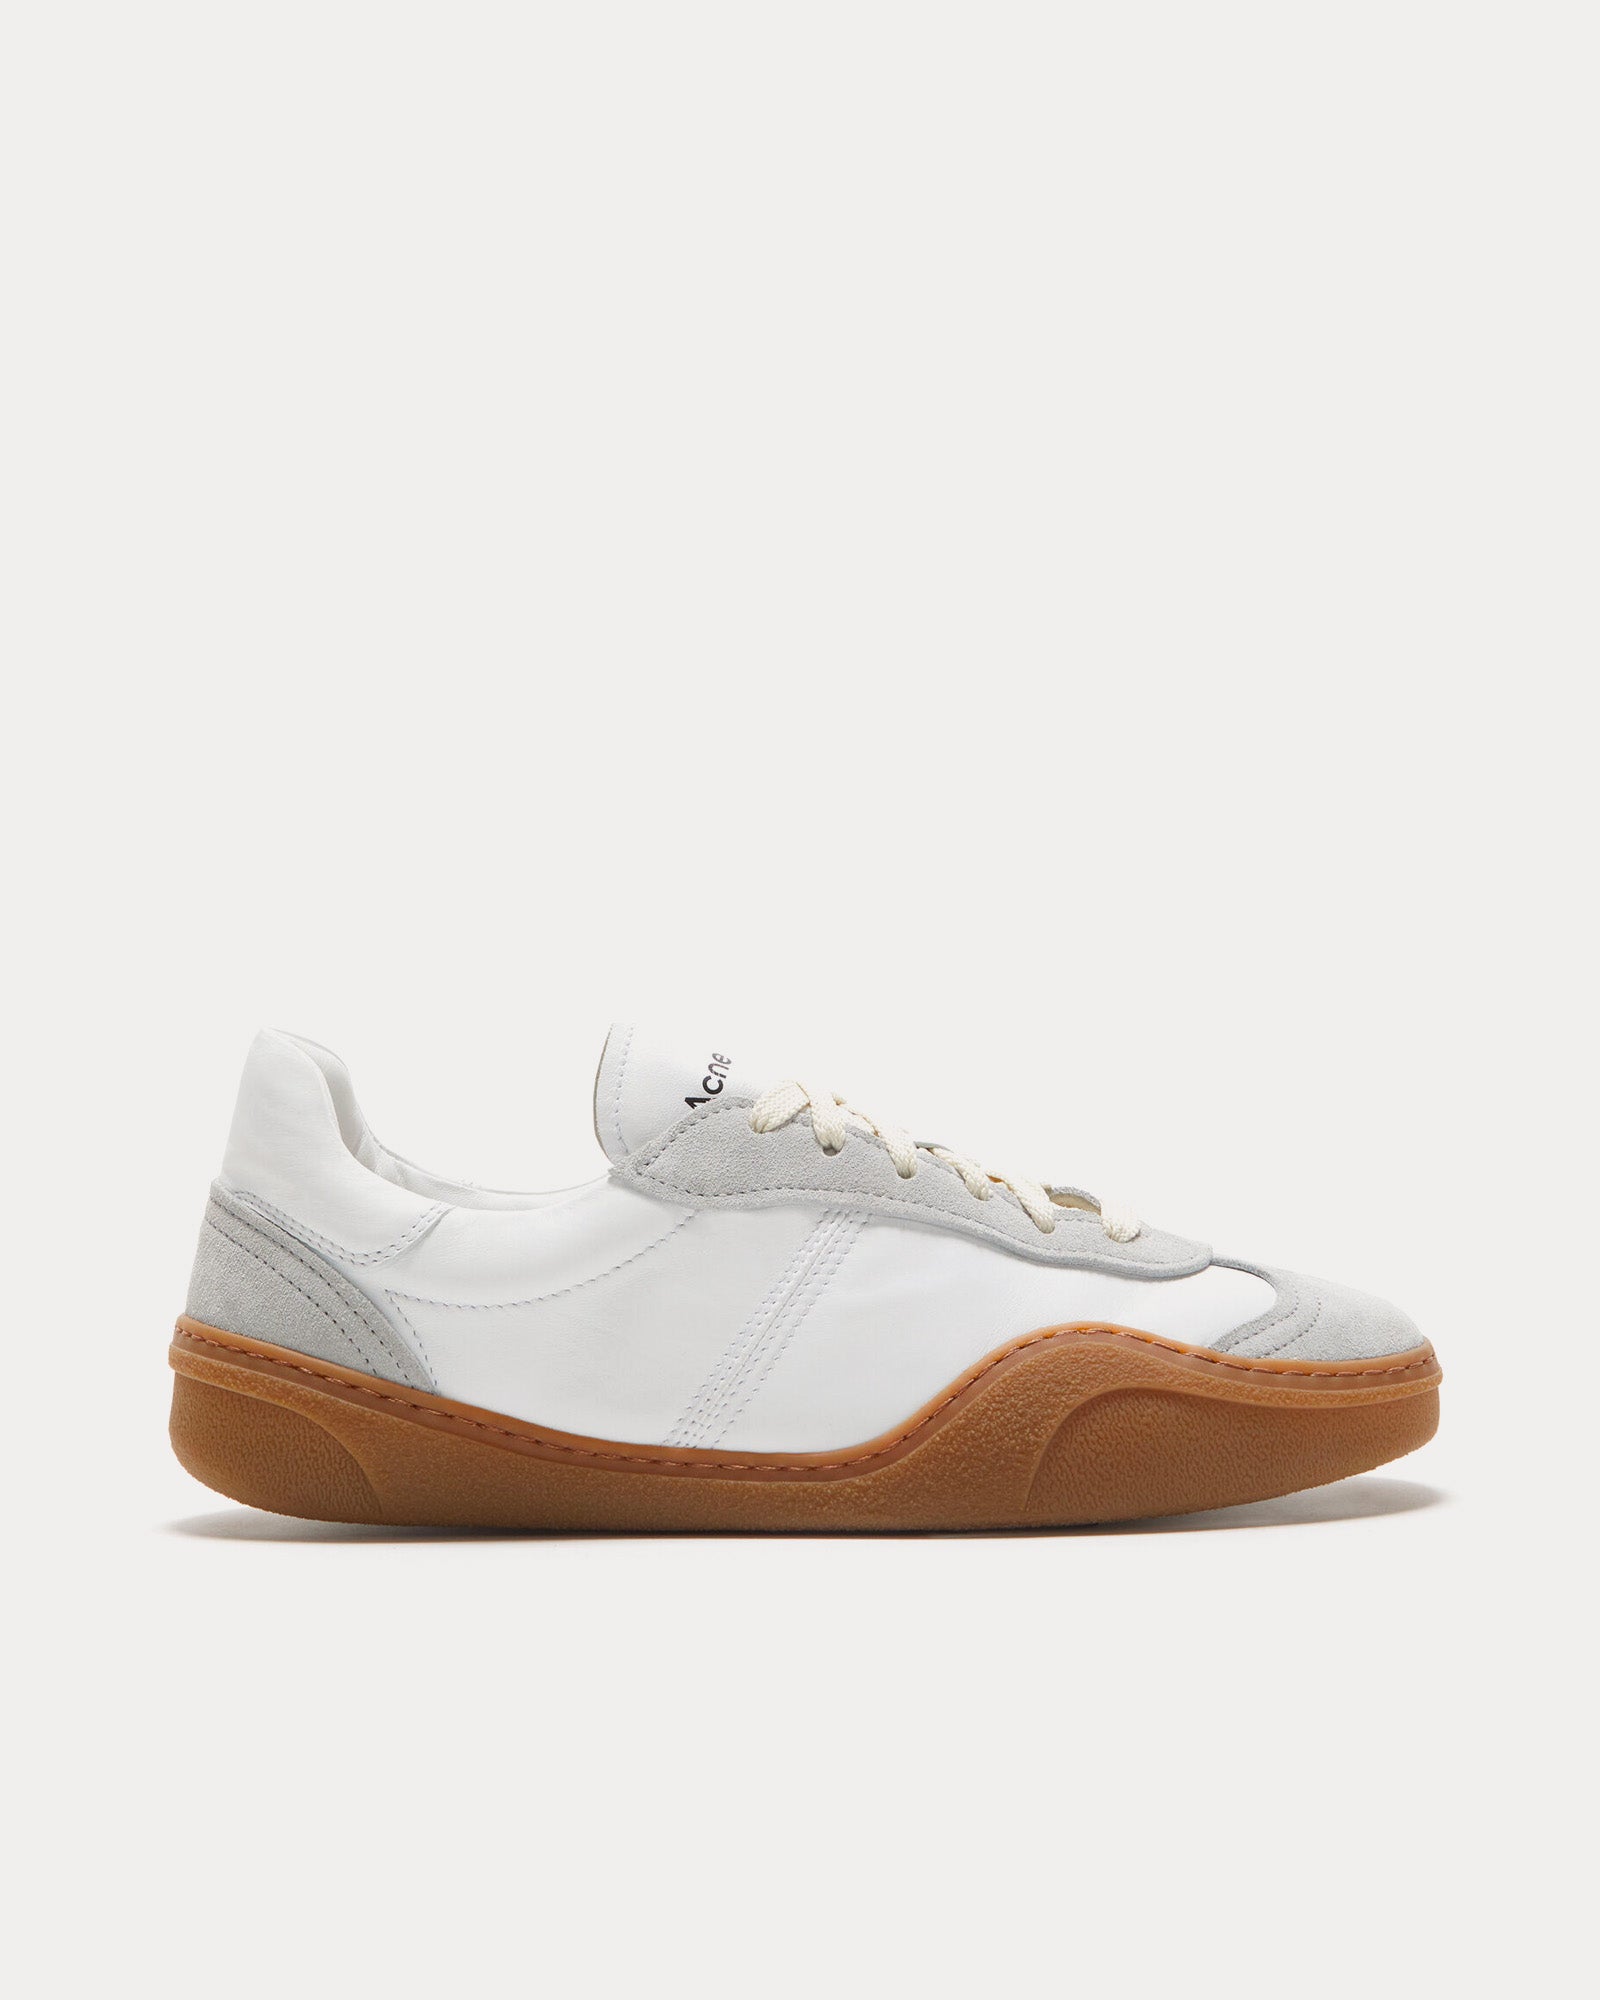 Acne Studios - Bars Lace-Up White / Brown Low Top Sneakers